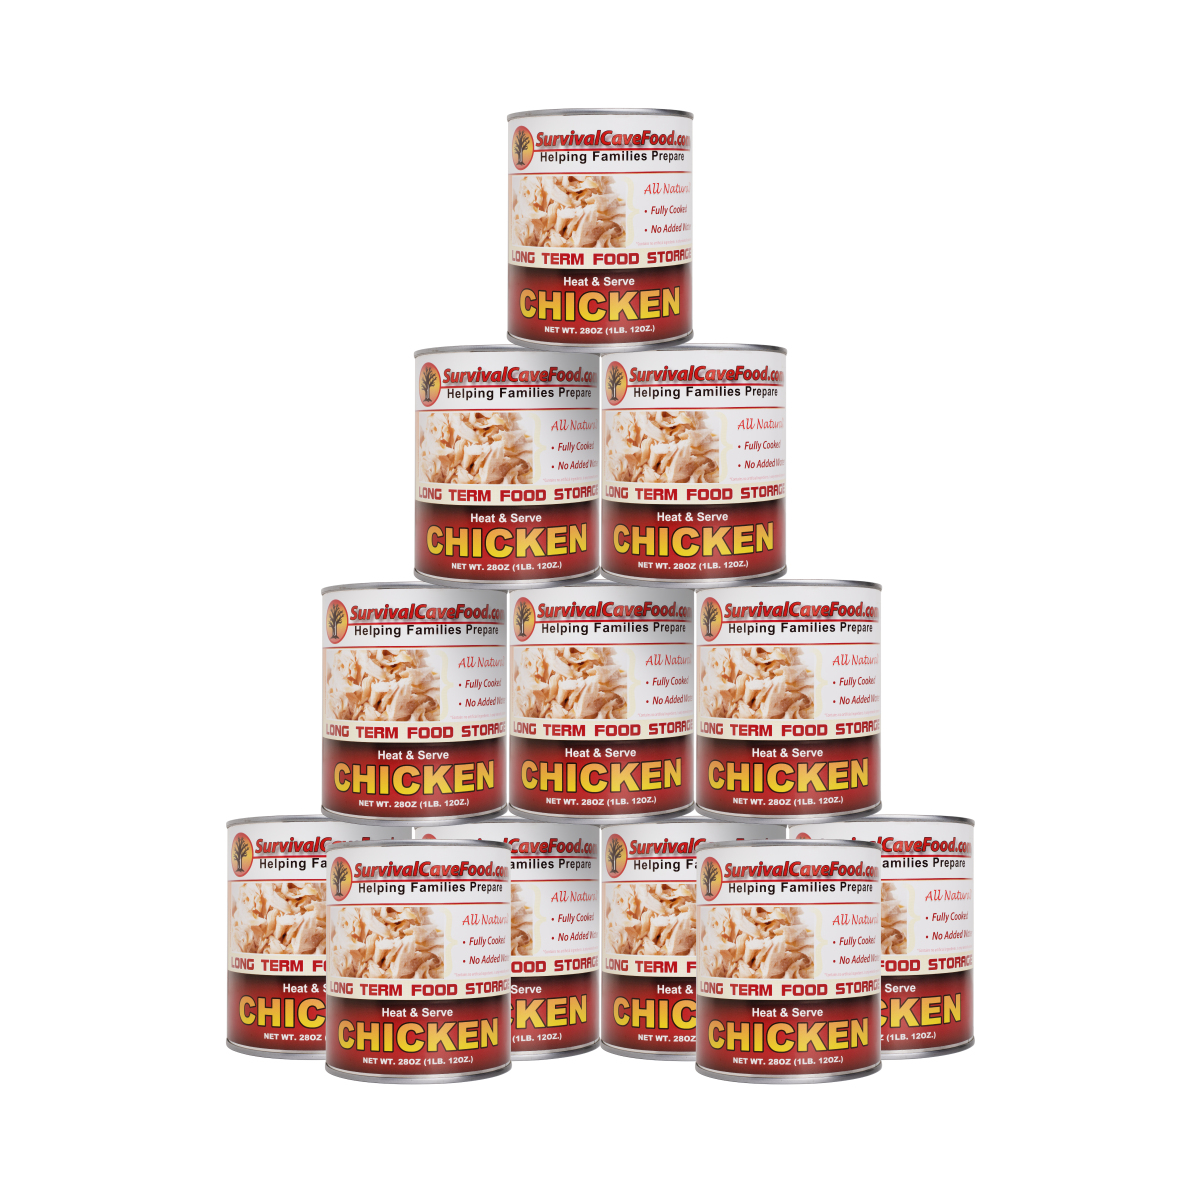 A stack of emergency food storage cans on a white background.